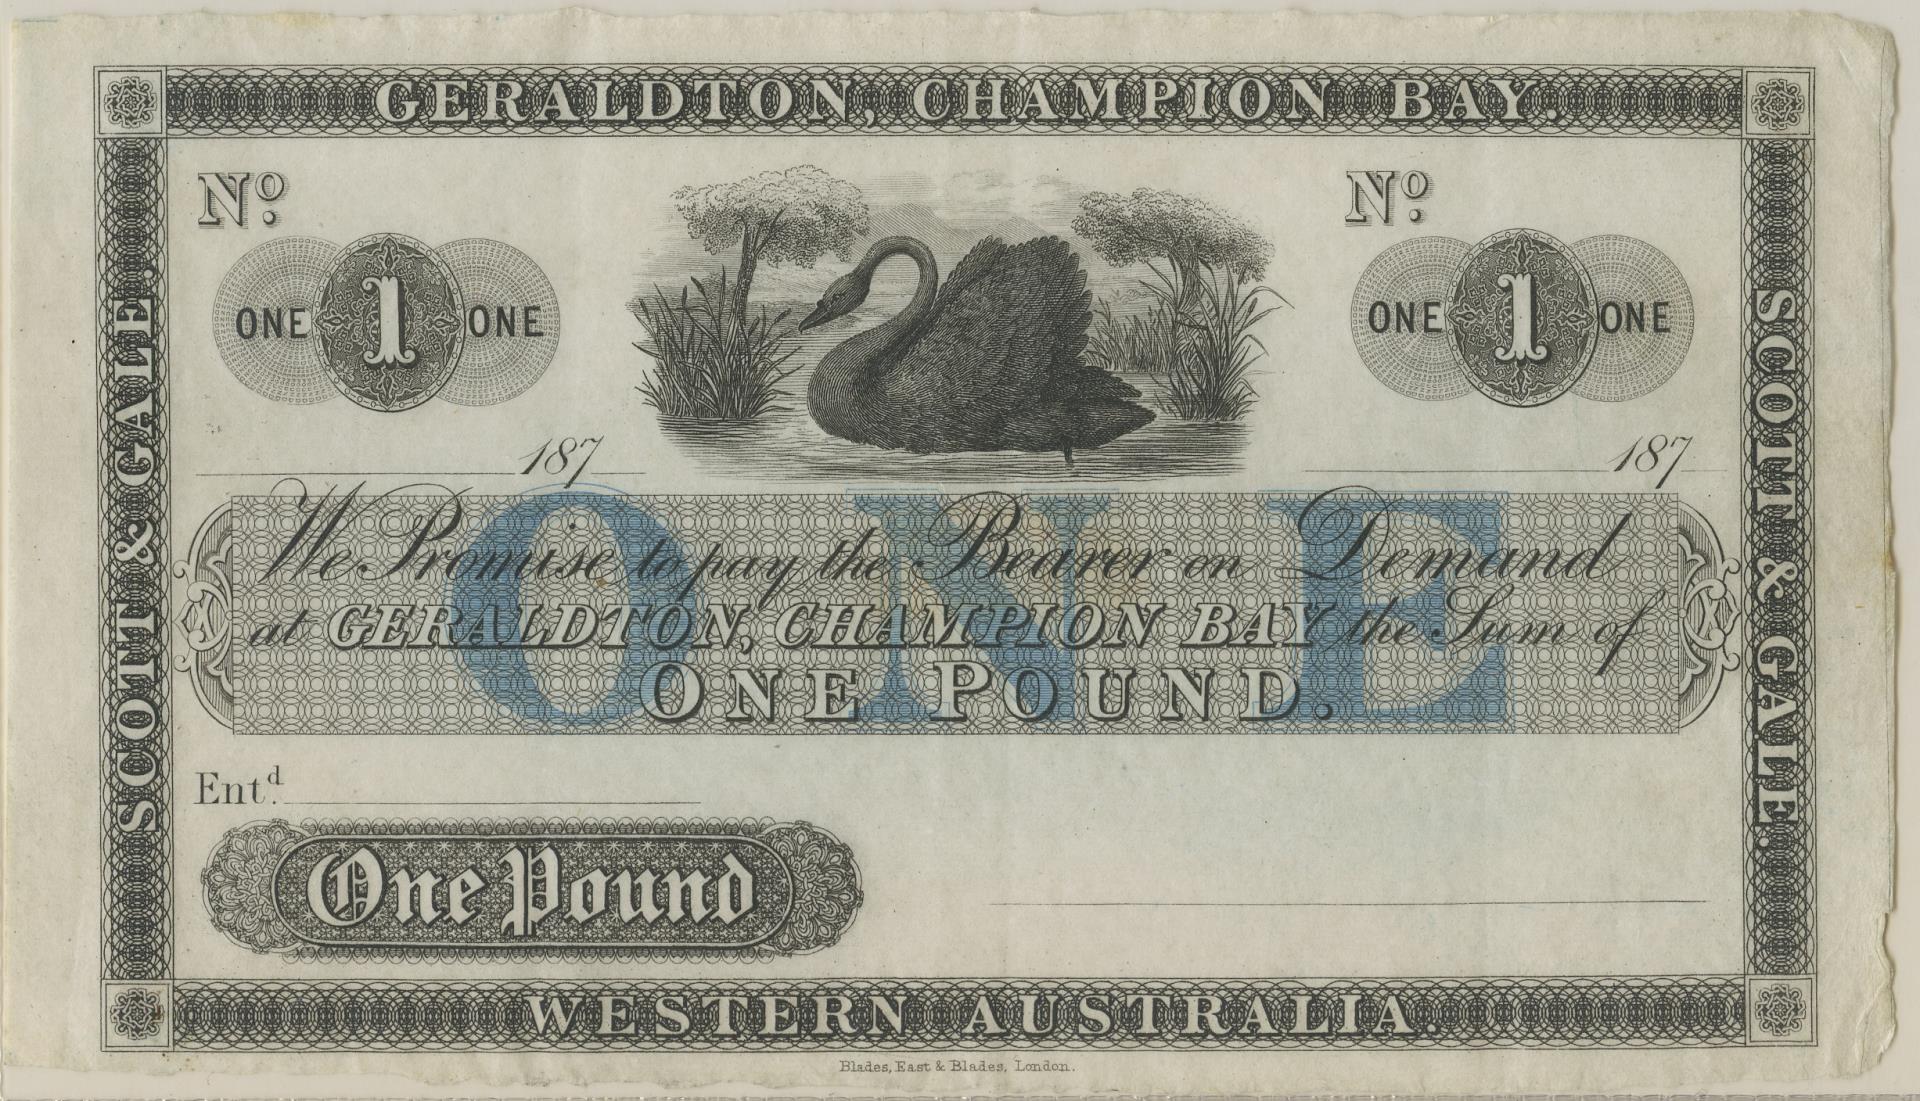 Geraldton's Heritage Collection welcomes historic One Pound Trader's Note